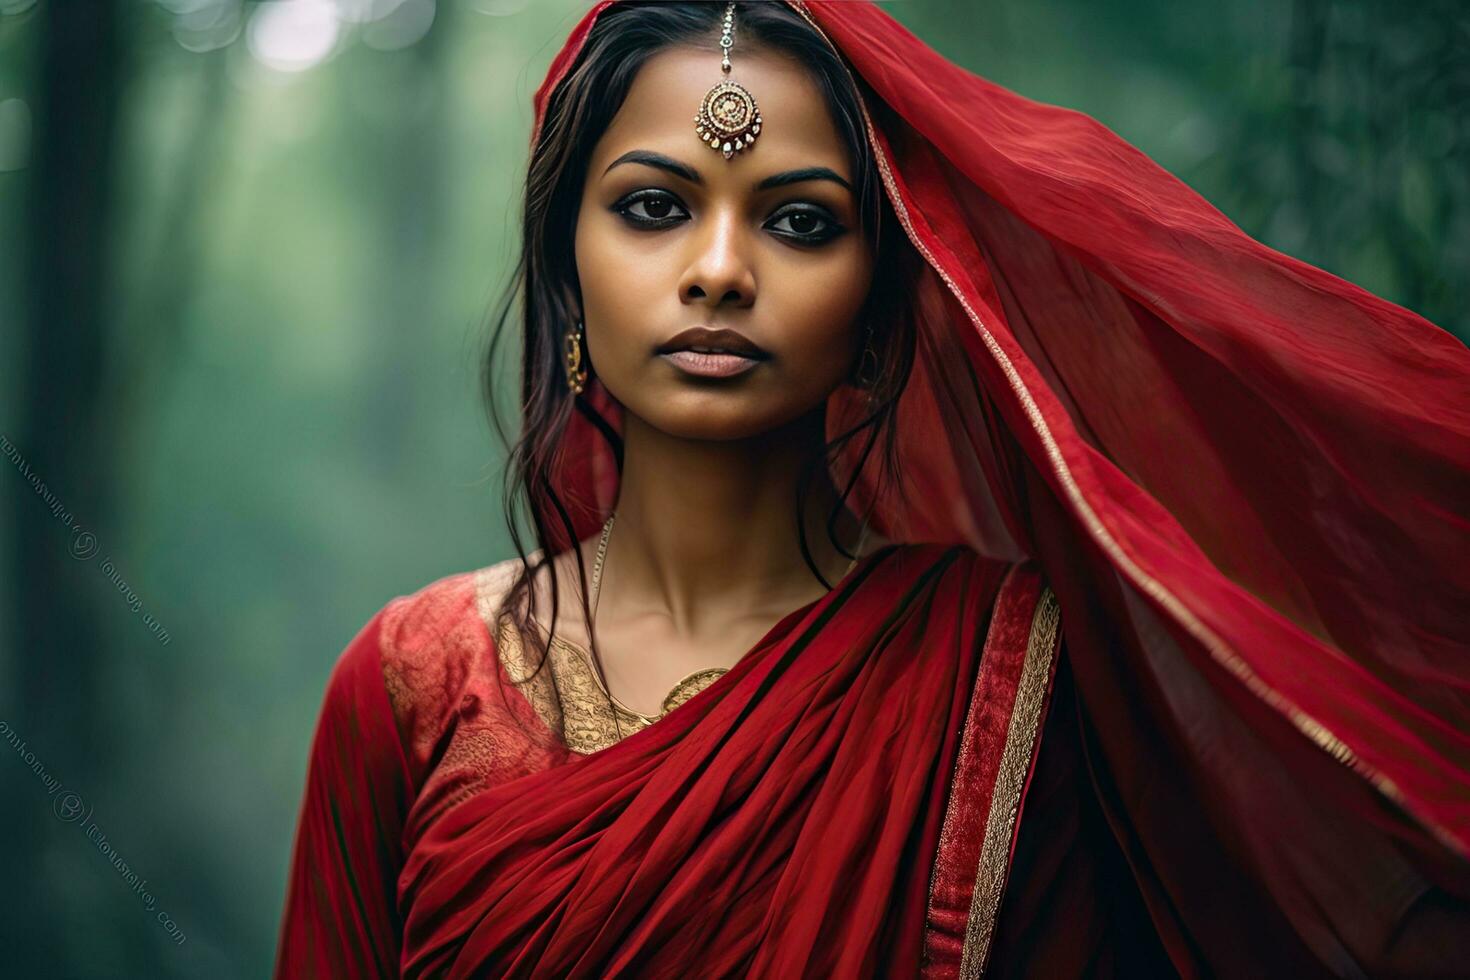 https://static.vecteezy.com/system/resources/previews/029/628/656/non_2x/beautiful-indian-girl-hindu-female-model-in-sari-and-kundan-accessories-red-traditional-costume-of-india-free-photo.jpeg